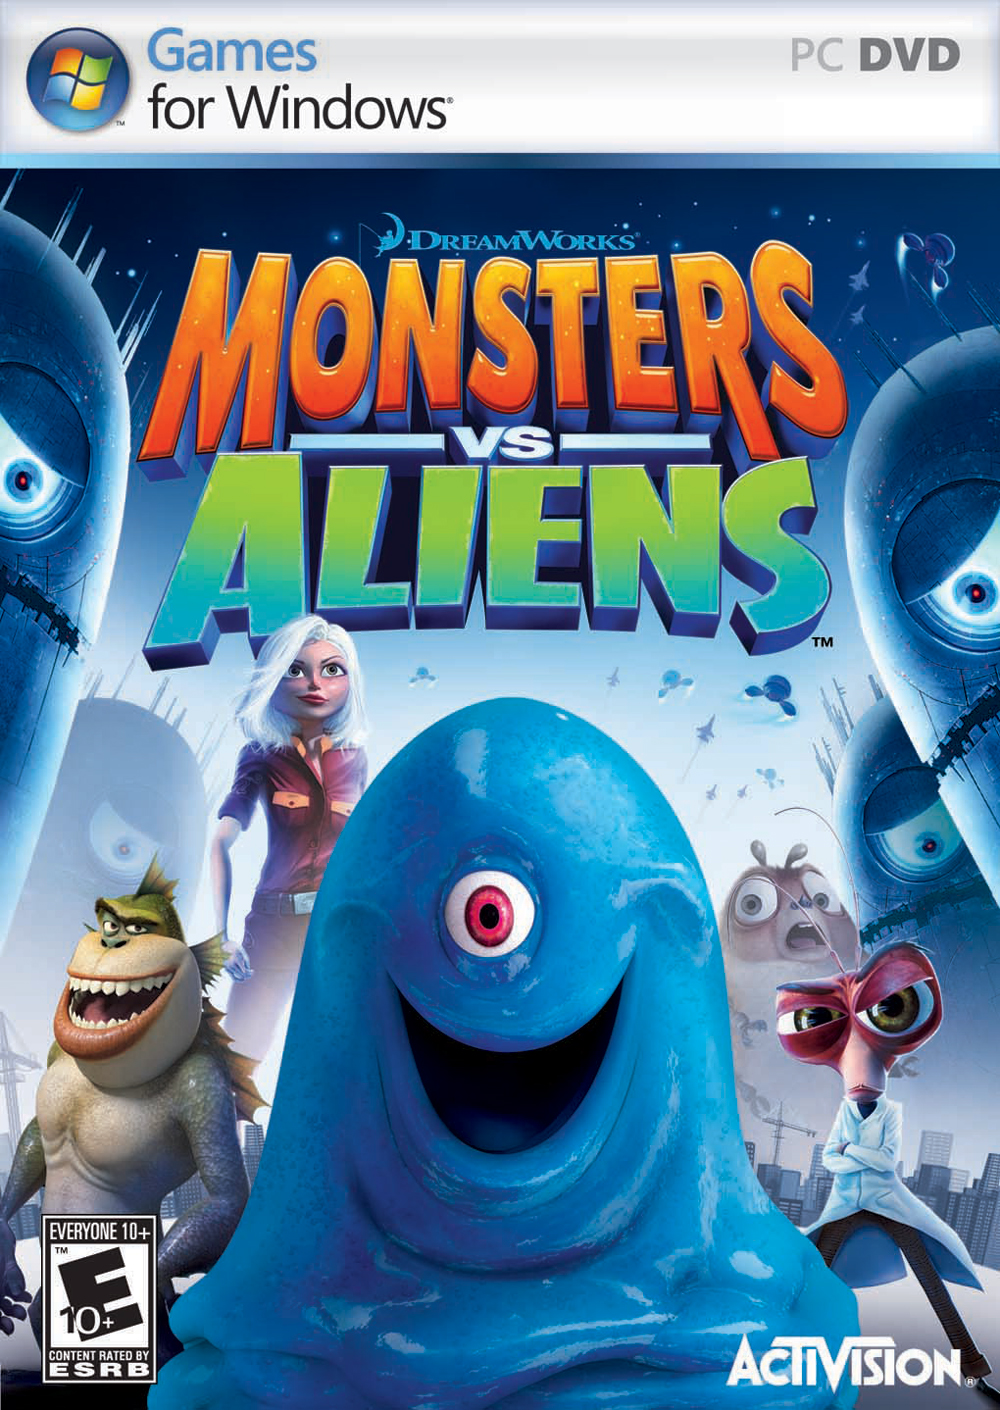 Potwory Kontra Obcy Monsters Vs Aliens Pc X360 Ps3 Wii Ps2 Nds Gryonline Pl